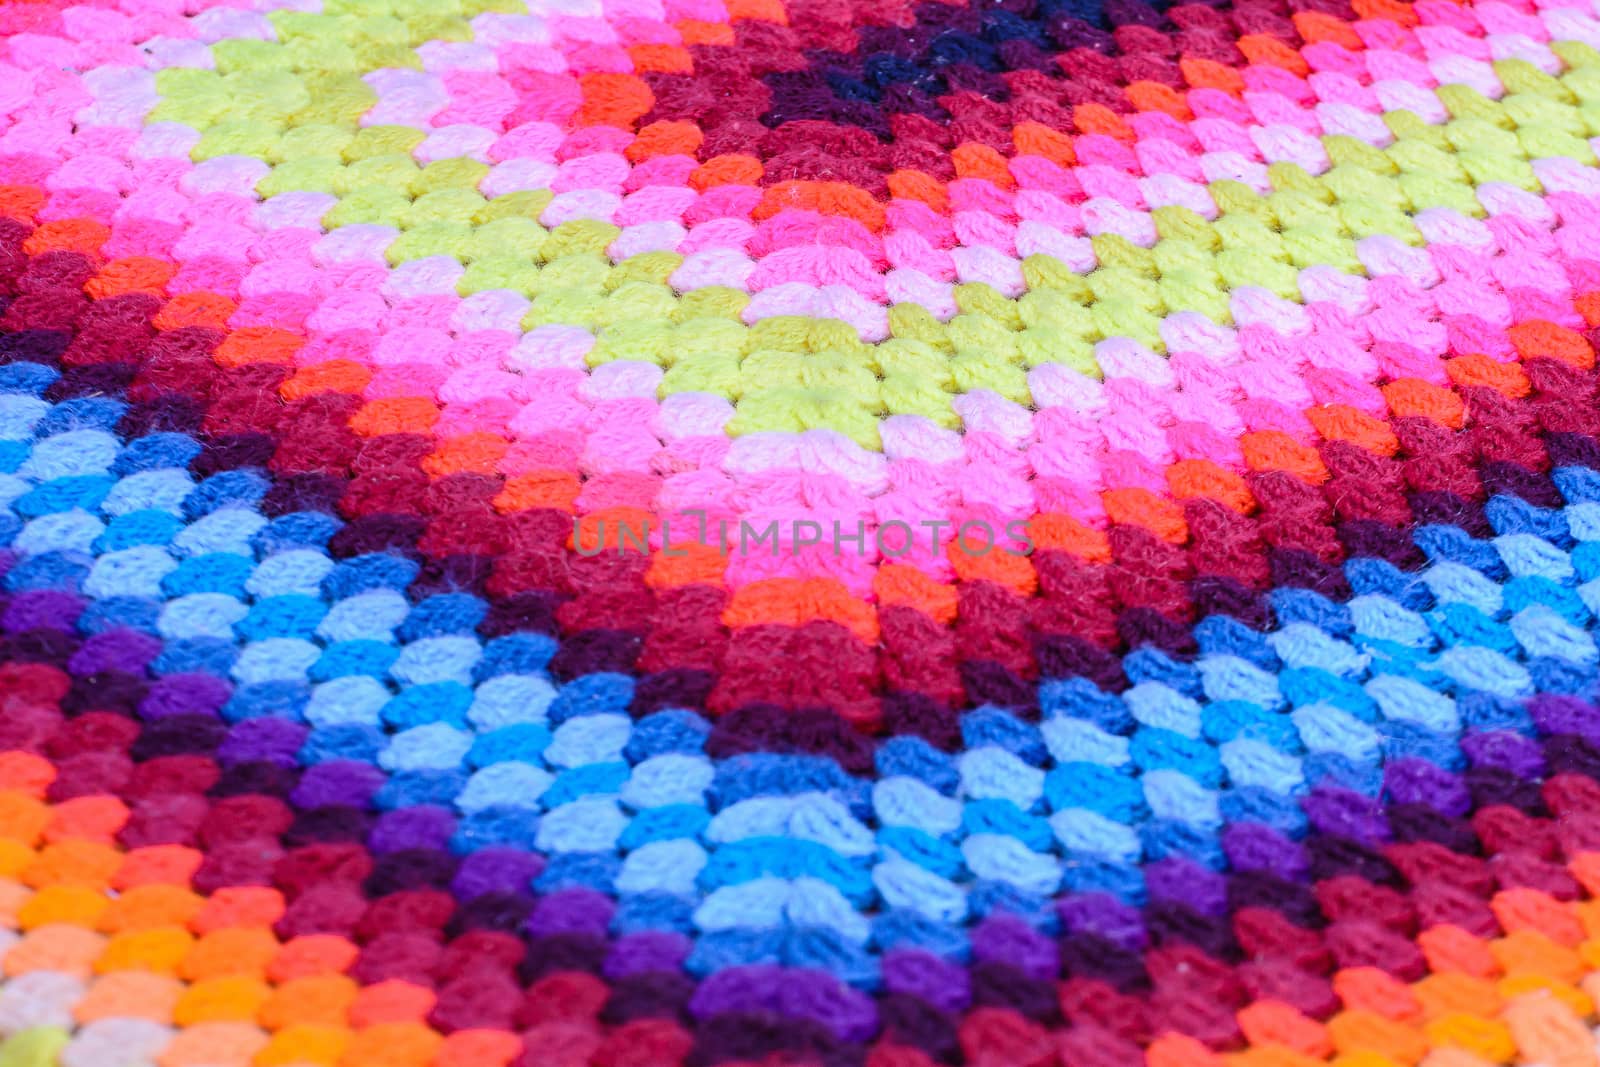 Colorful hand woven cotton fabric for a background